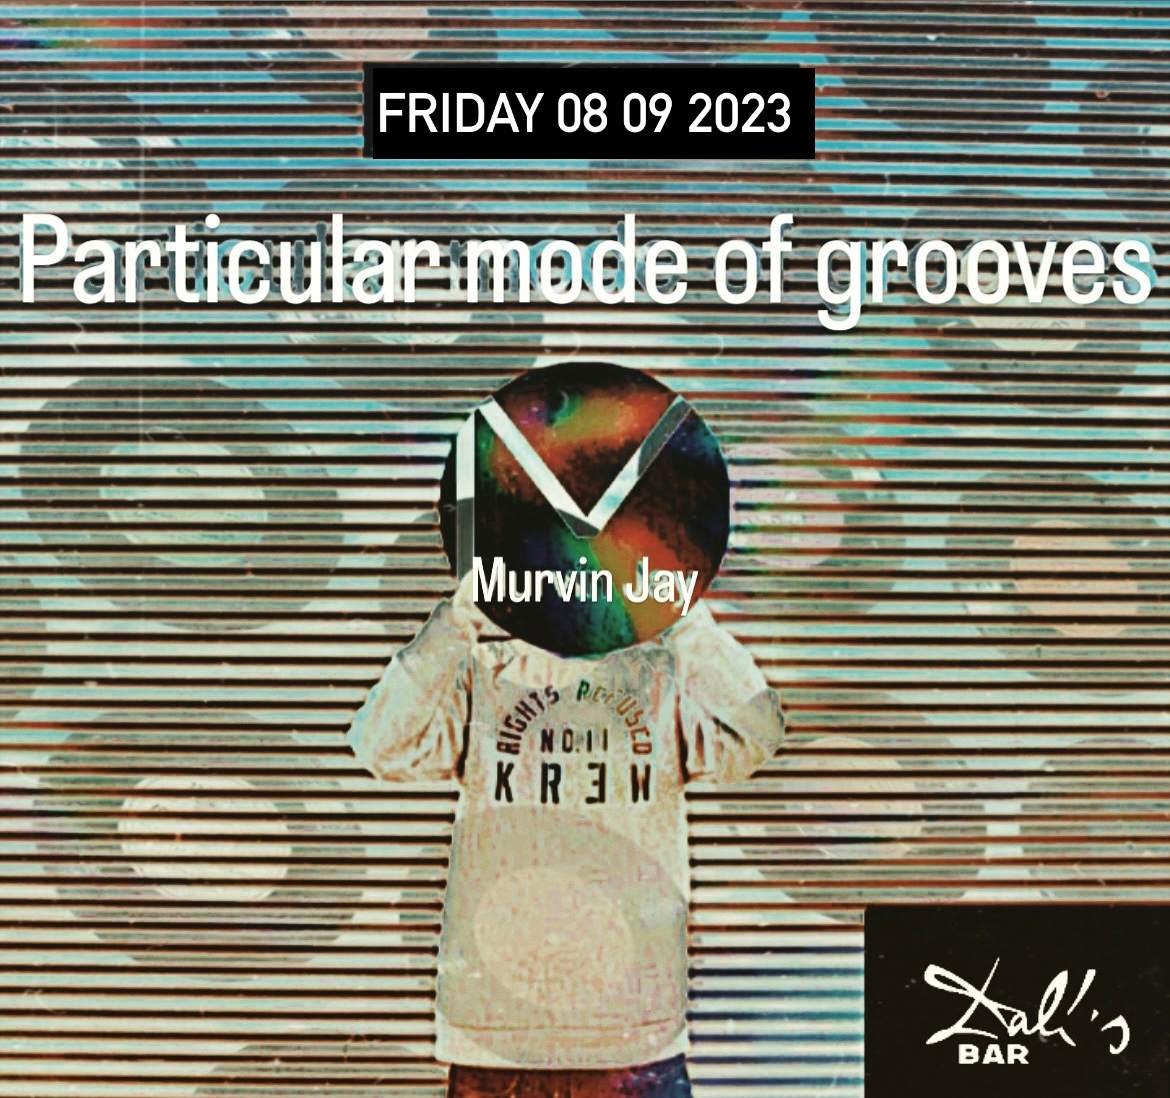 Particular Mode Of Grooves - フライヤー表